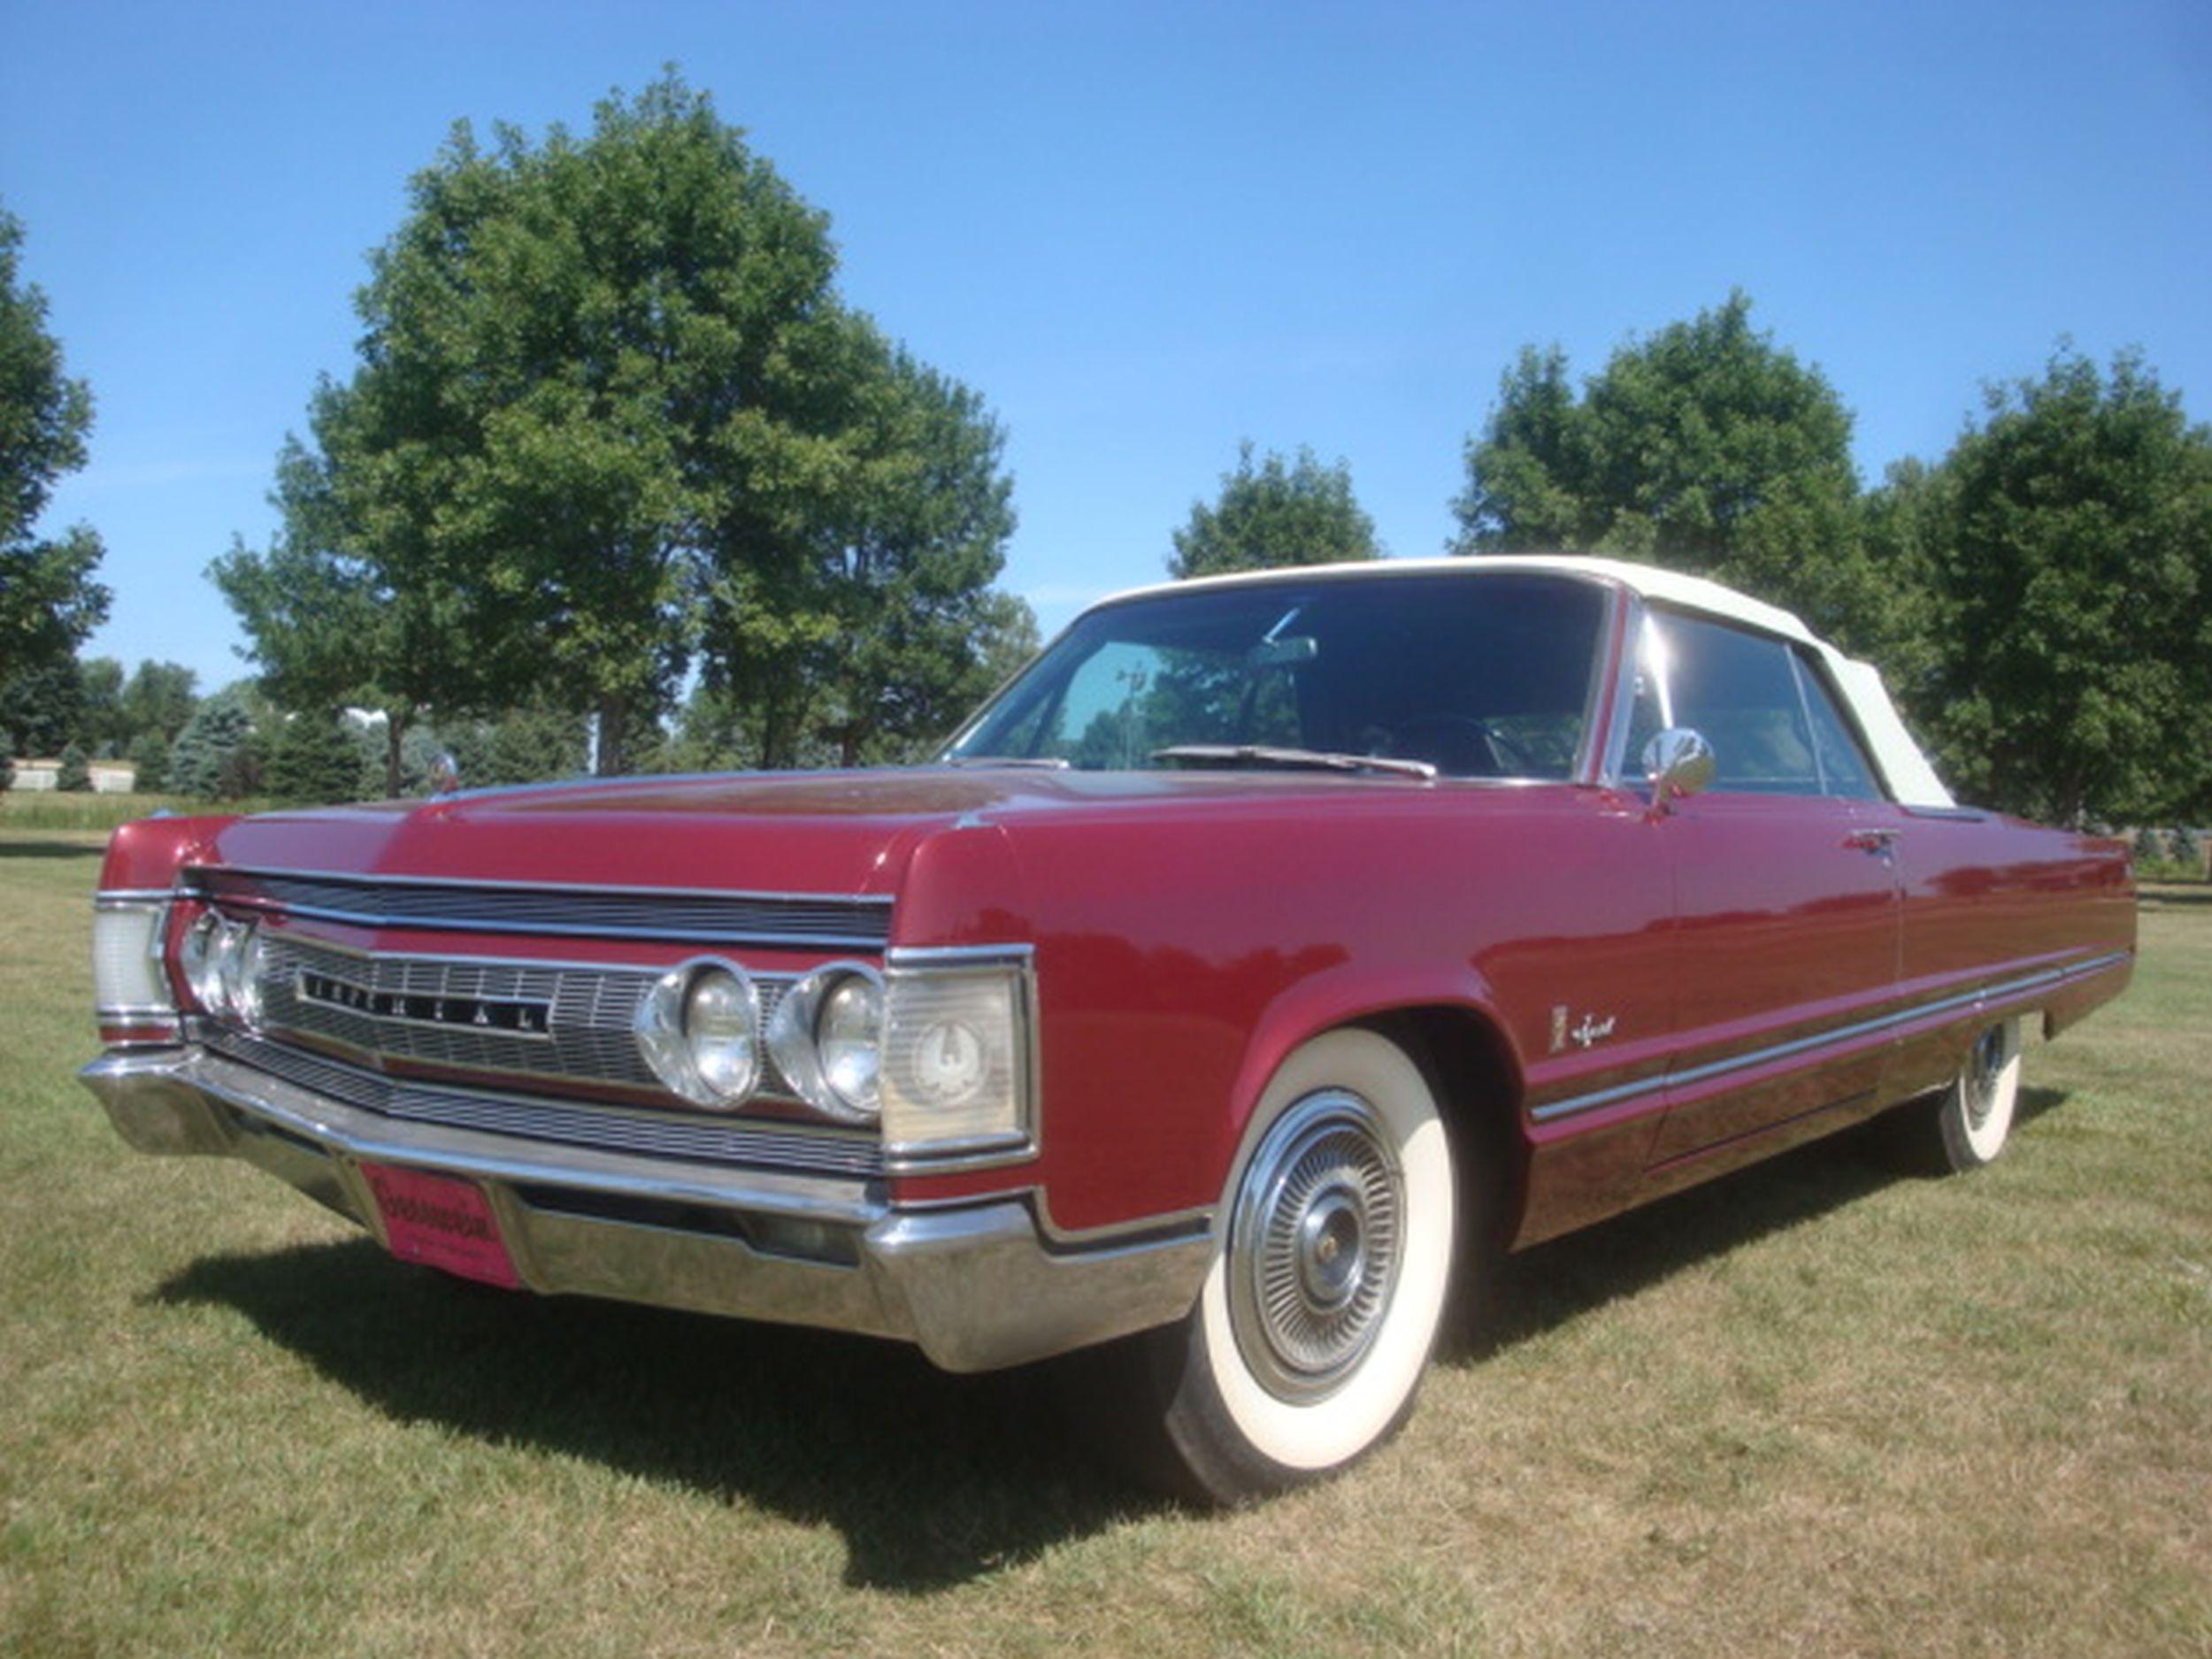 1967 Chrysler Imperial Convertible